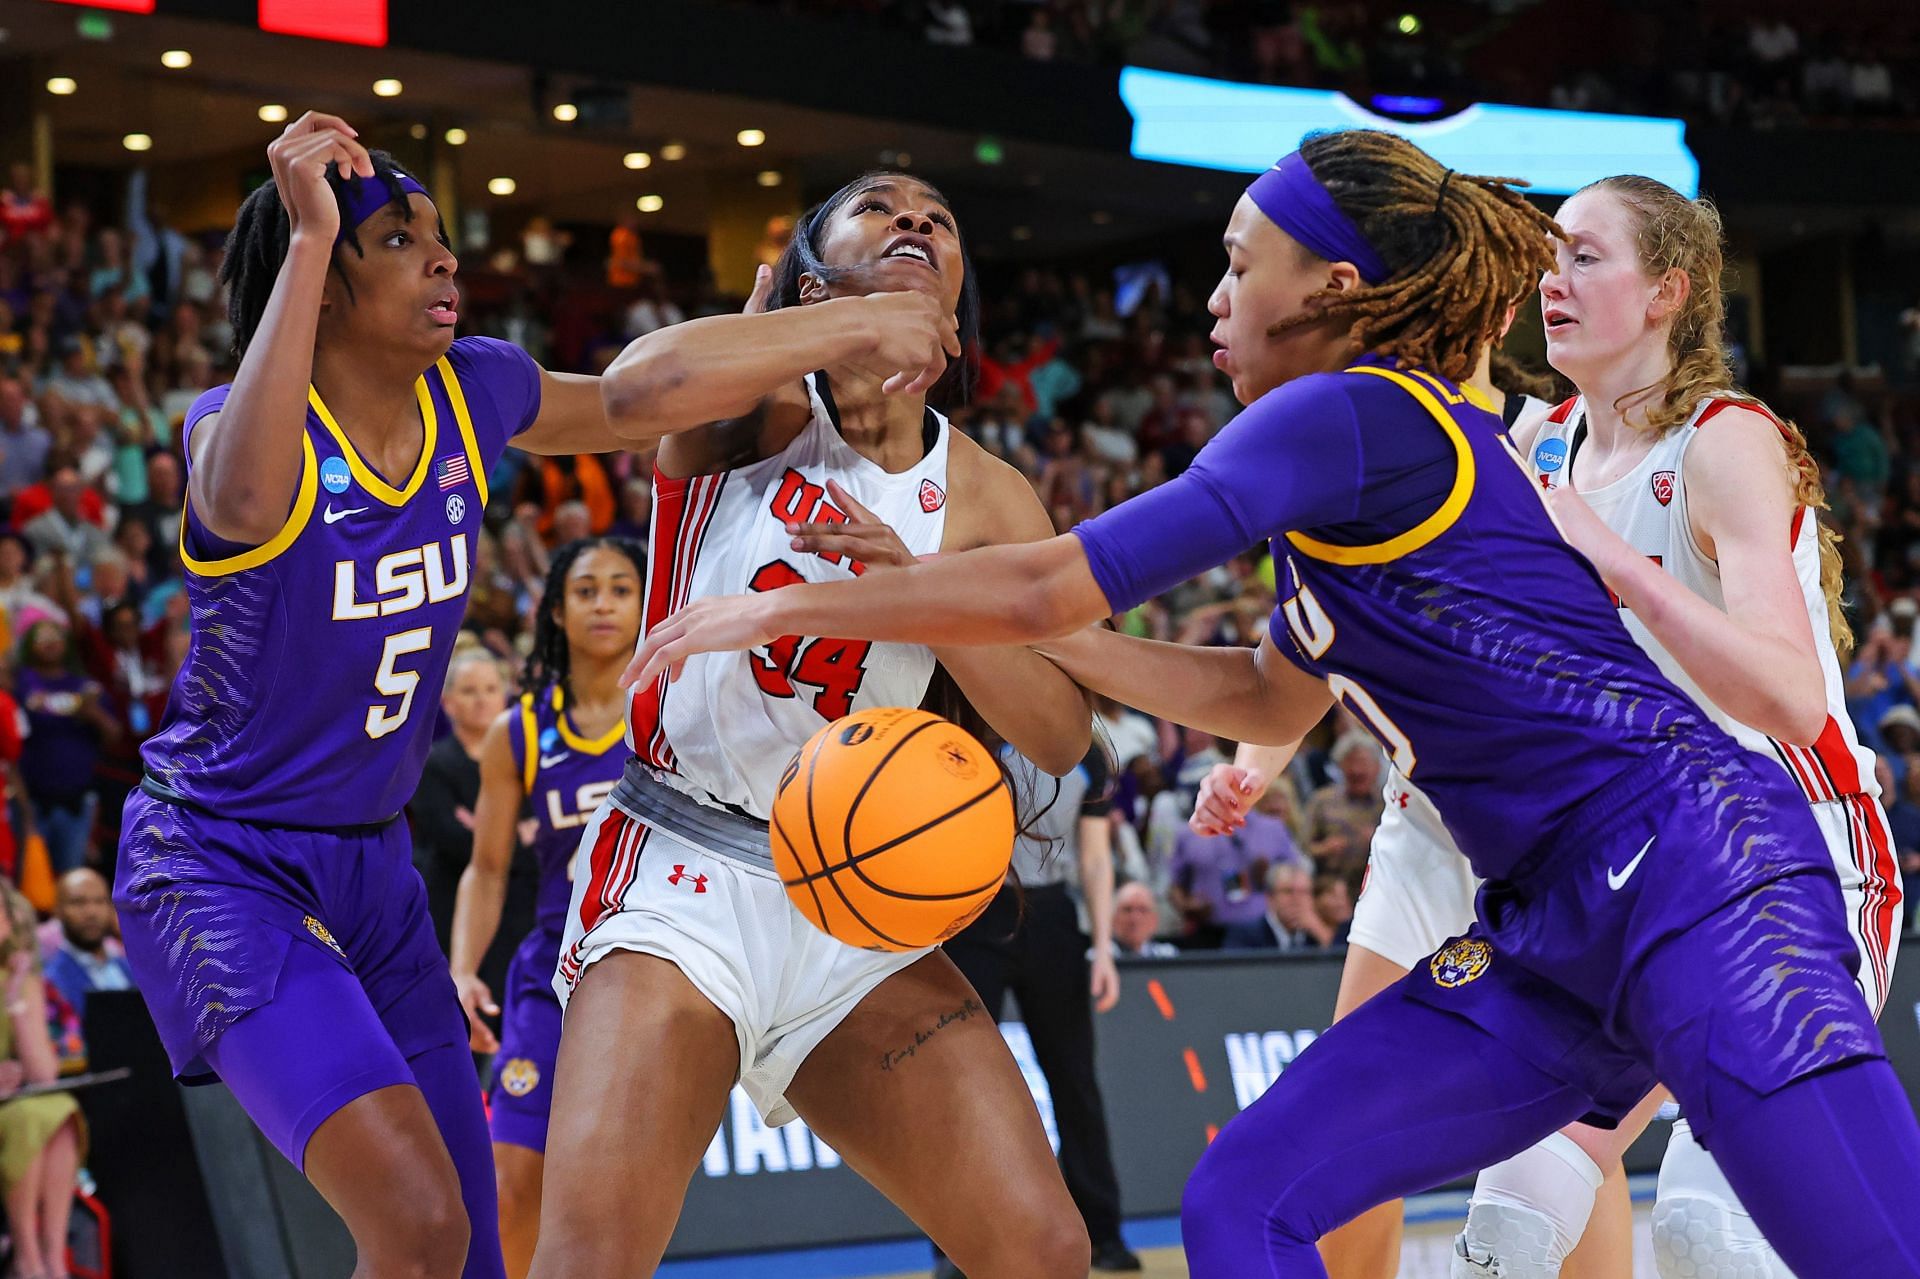 Smith averaged 11.7 points, 7.6 rebounds and 1.6 blocks per game before she suffered multiple knee injuries that ruled her out for the 2023-24 season.